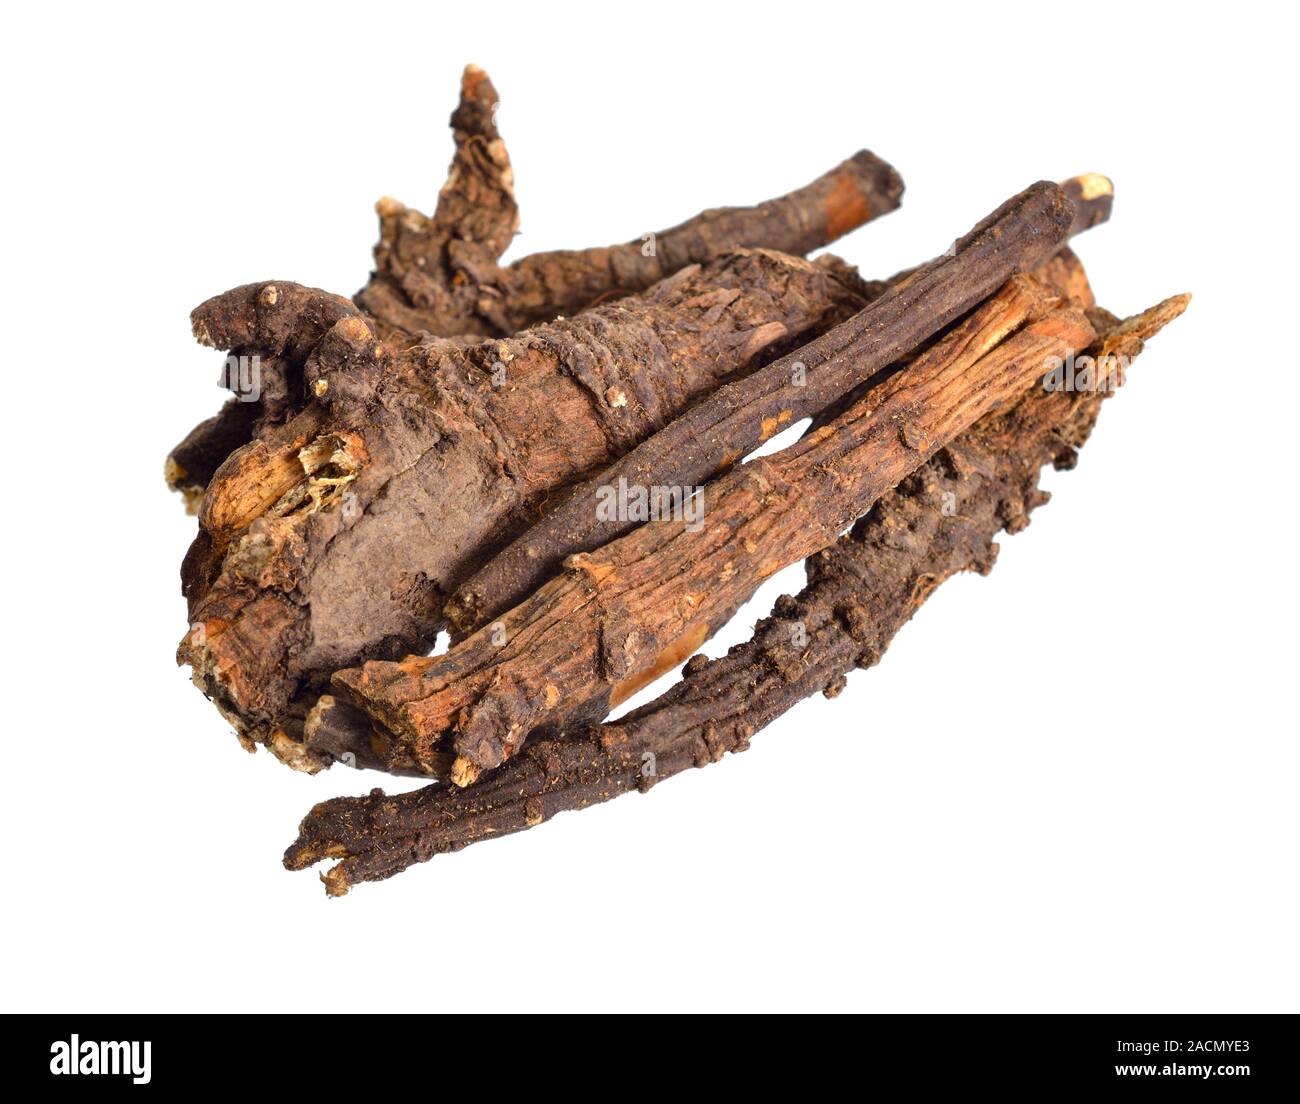 Ligusticum porteri, known as Osha. Dried roots. Isolated on white background Stock Photo